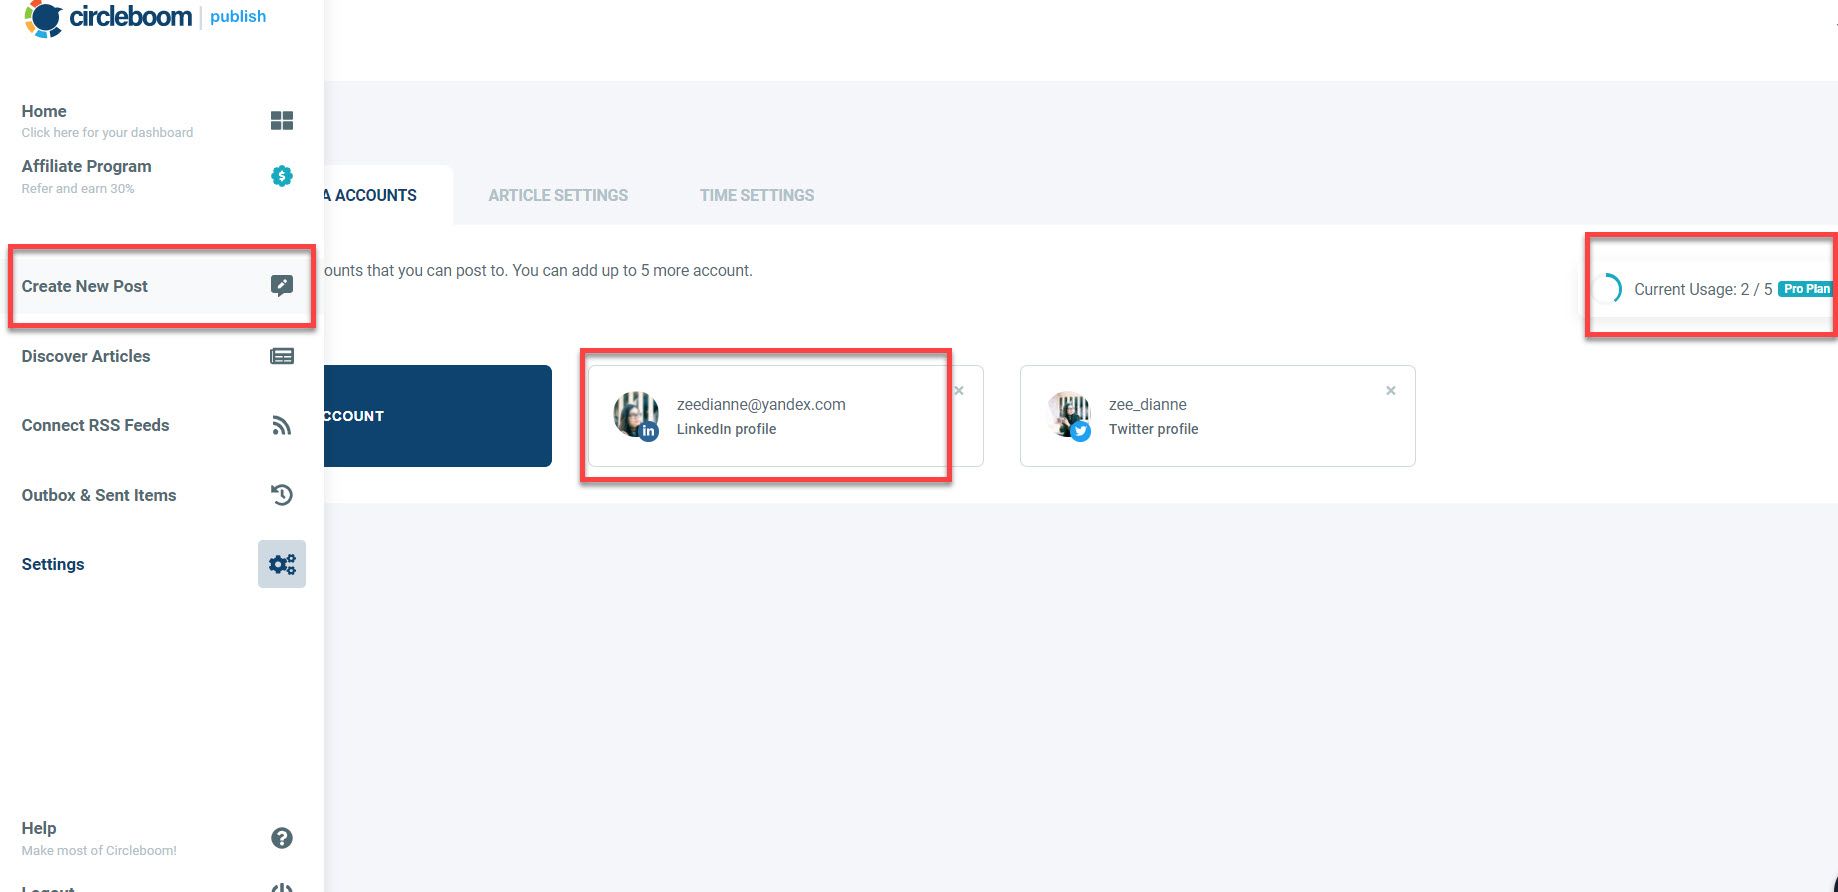 You may make a post for each of your Circleboom Publish-linked account using the Create New Post dashboard.